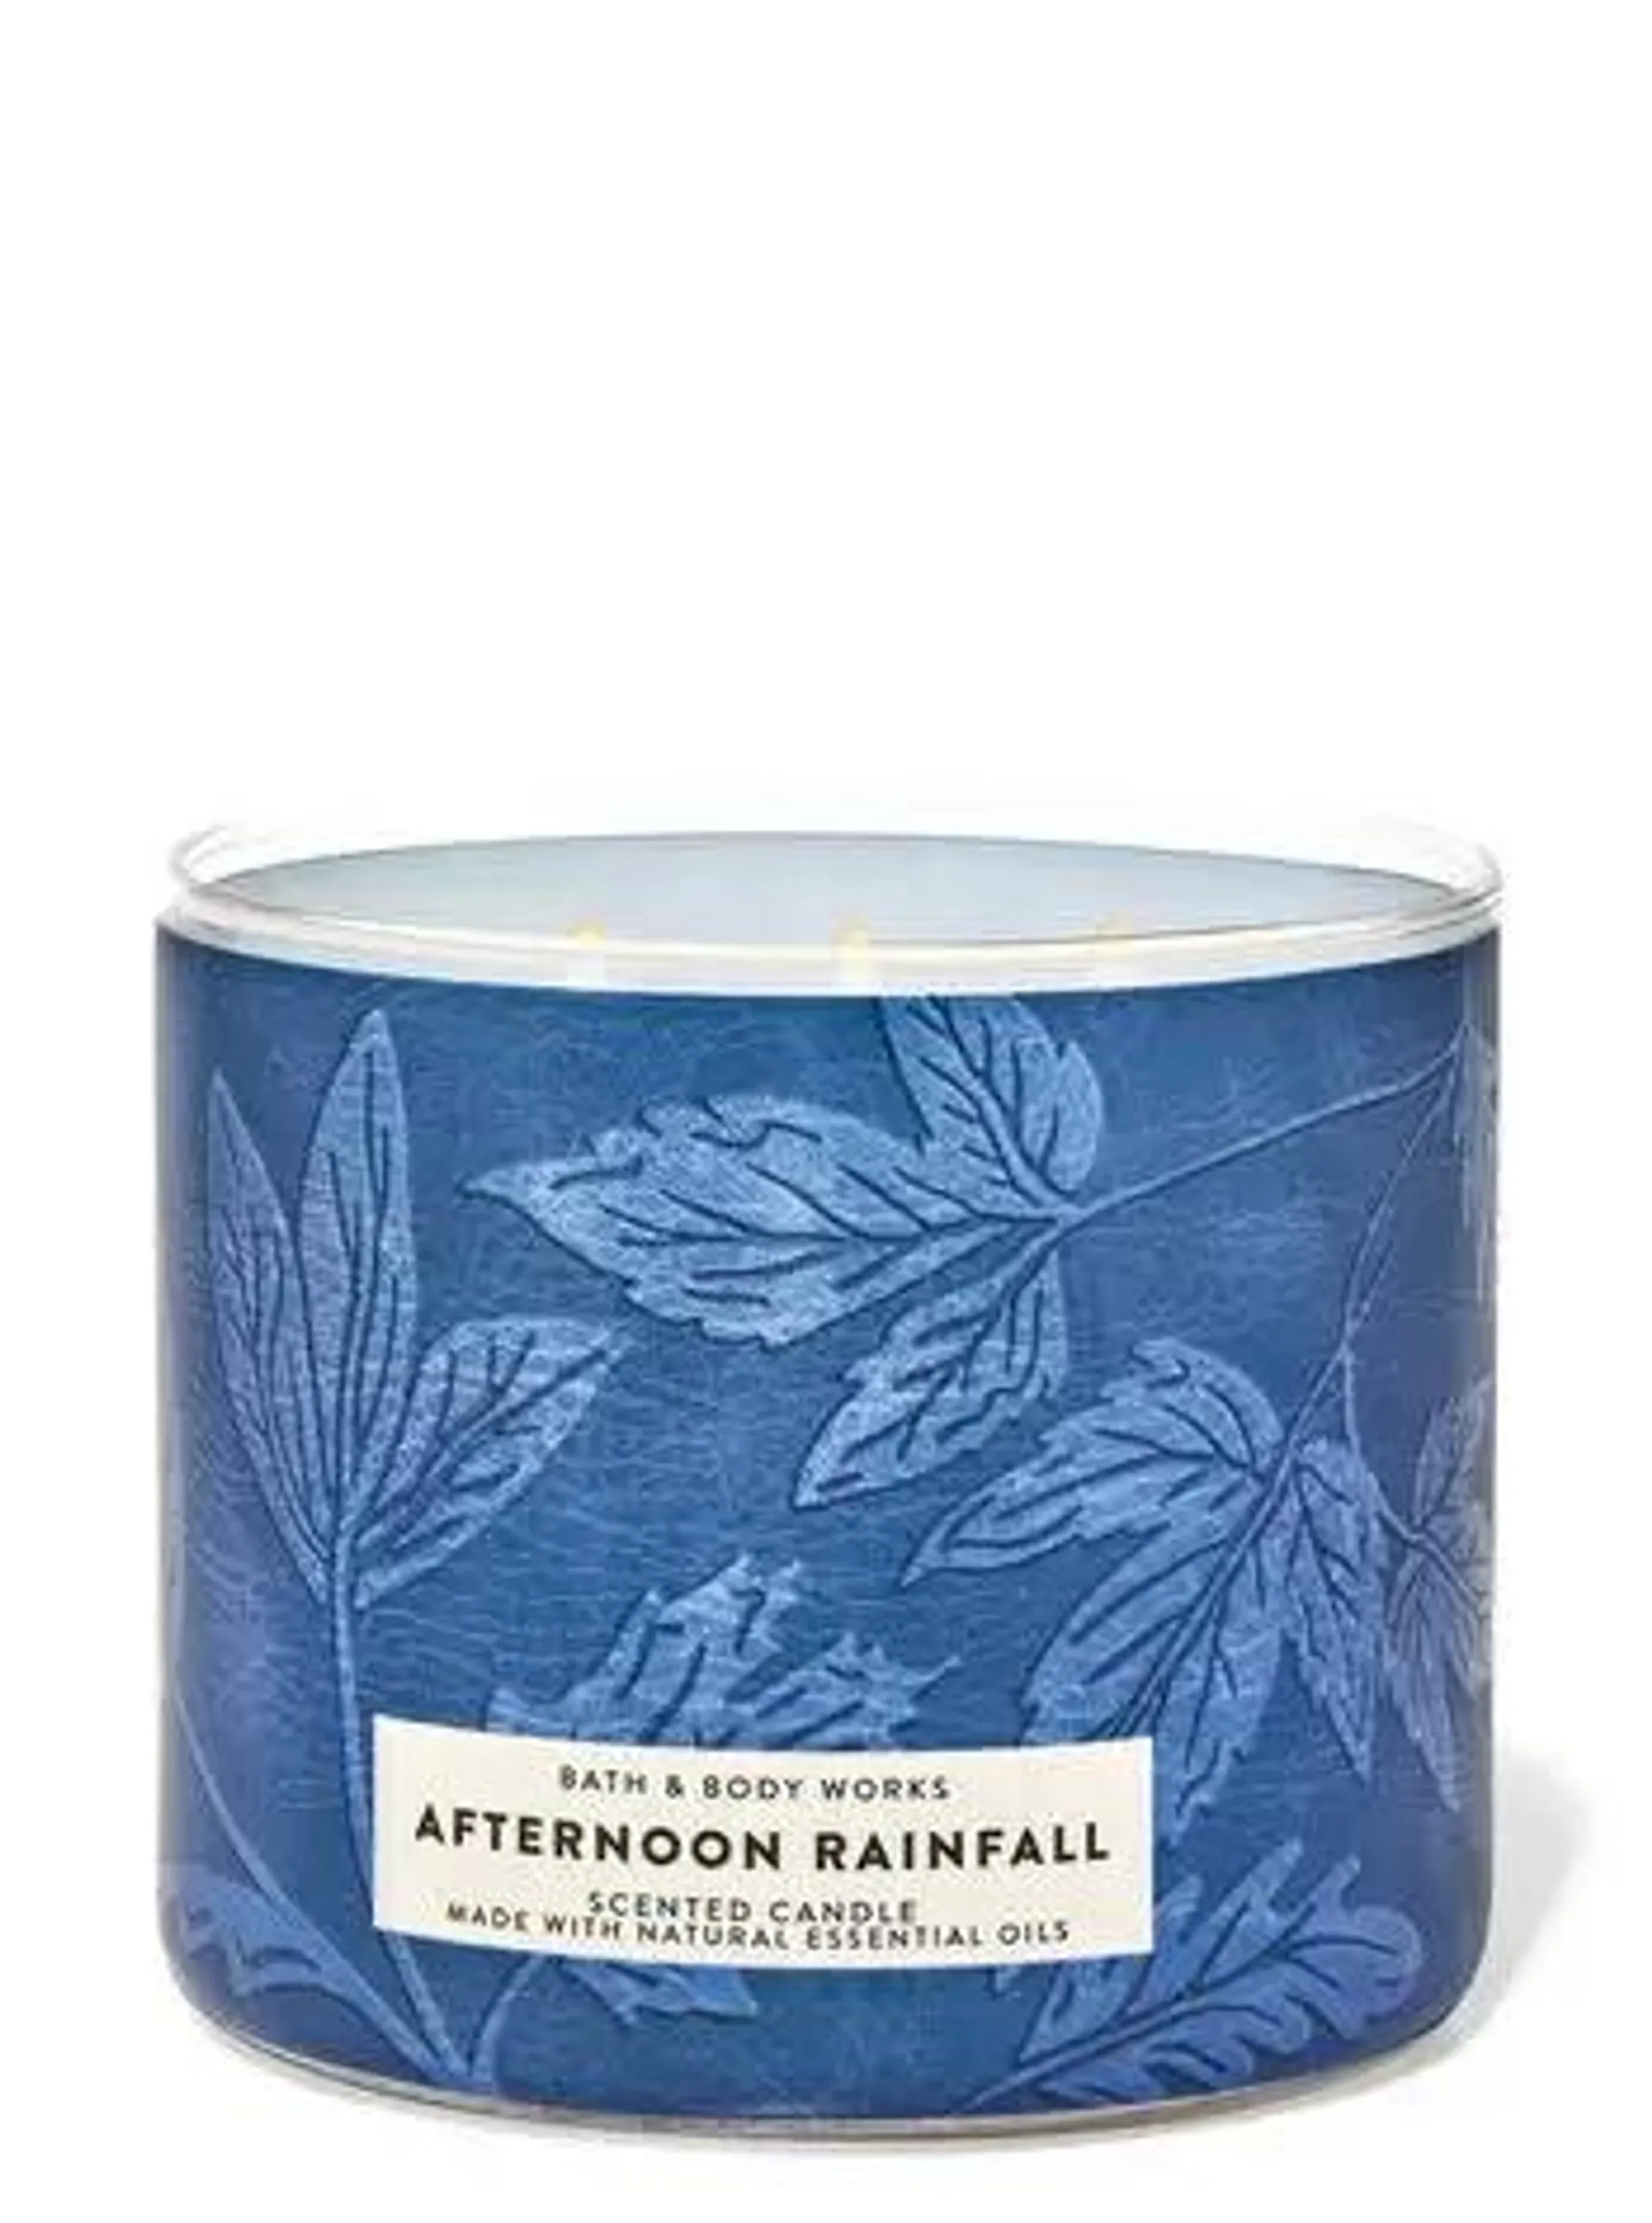 Afternoon Rainfall 3-Wick Candle